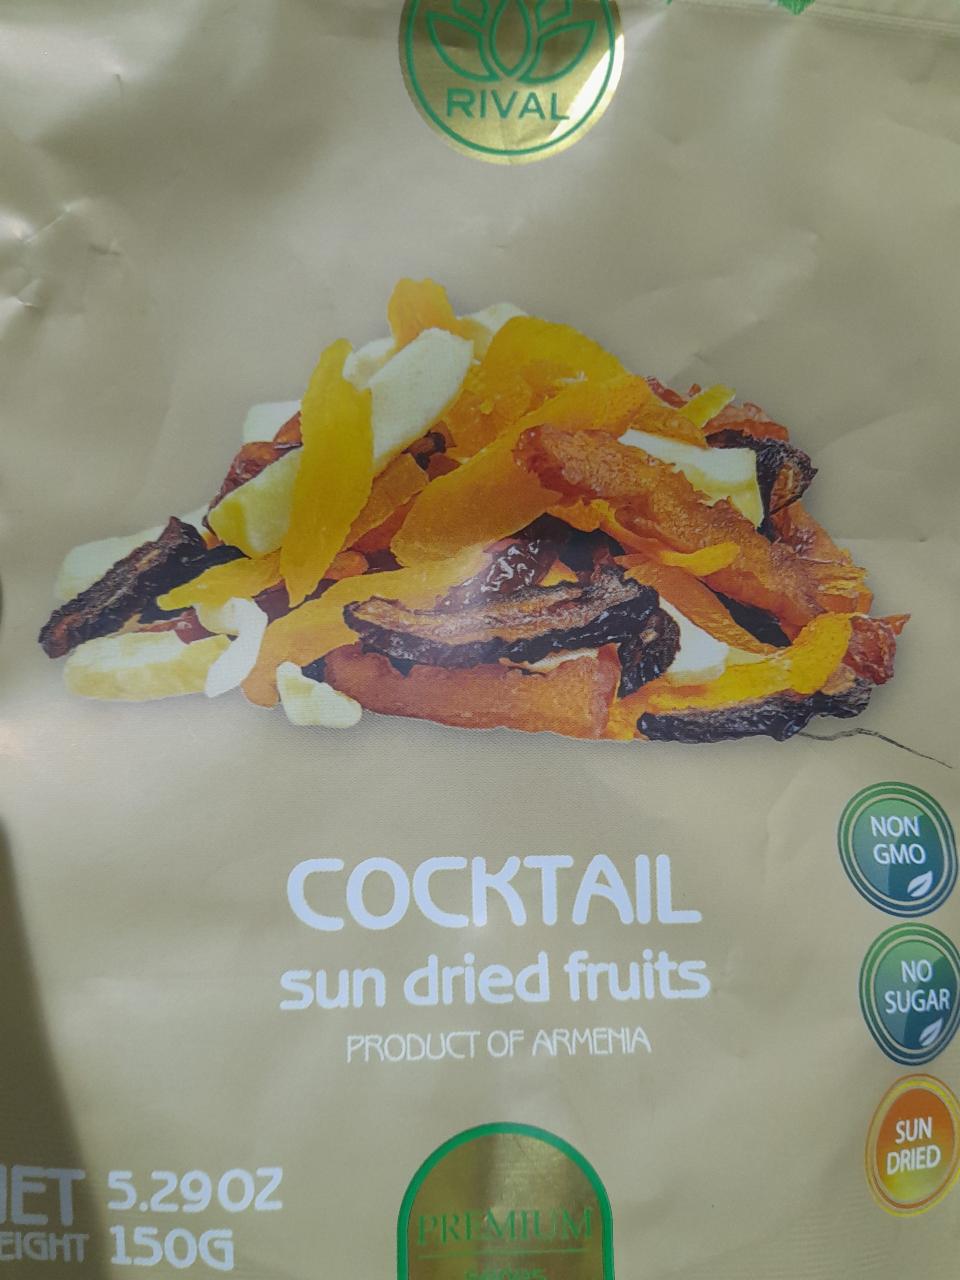 Fotografie - Cocktail sun dried fruits Rival